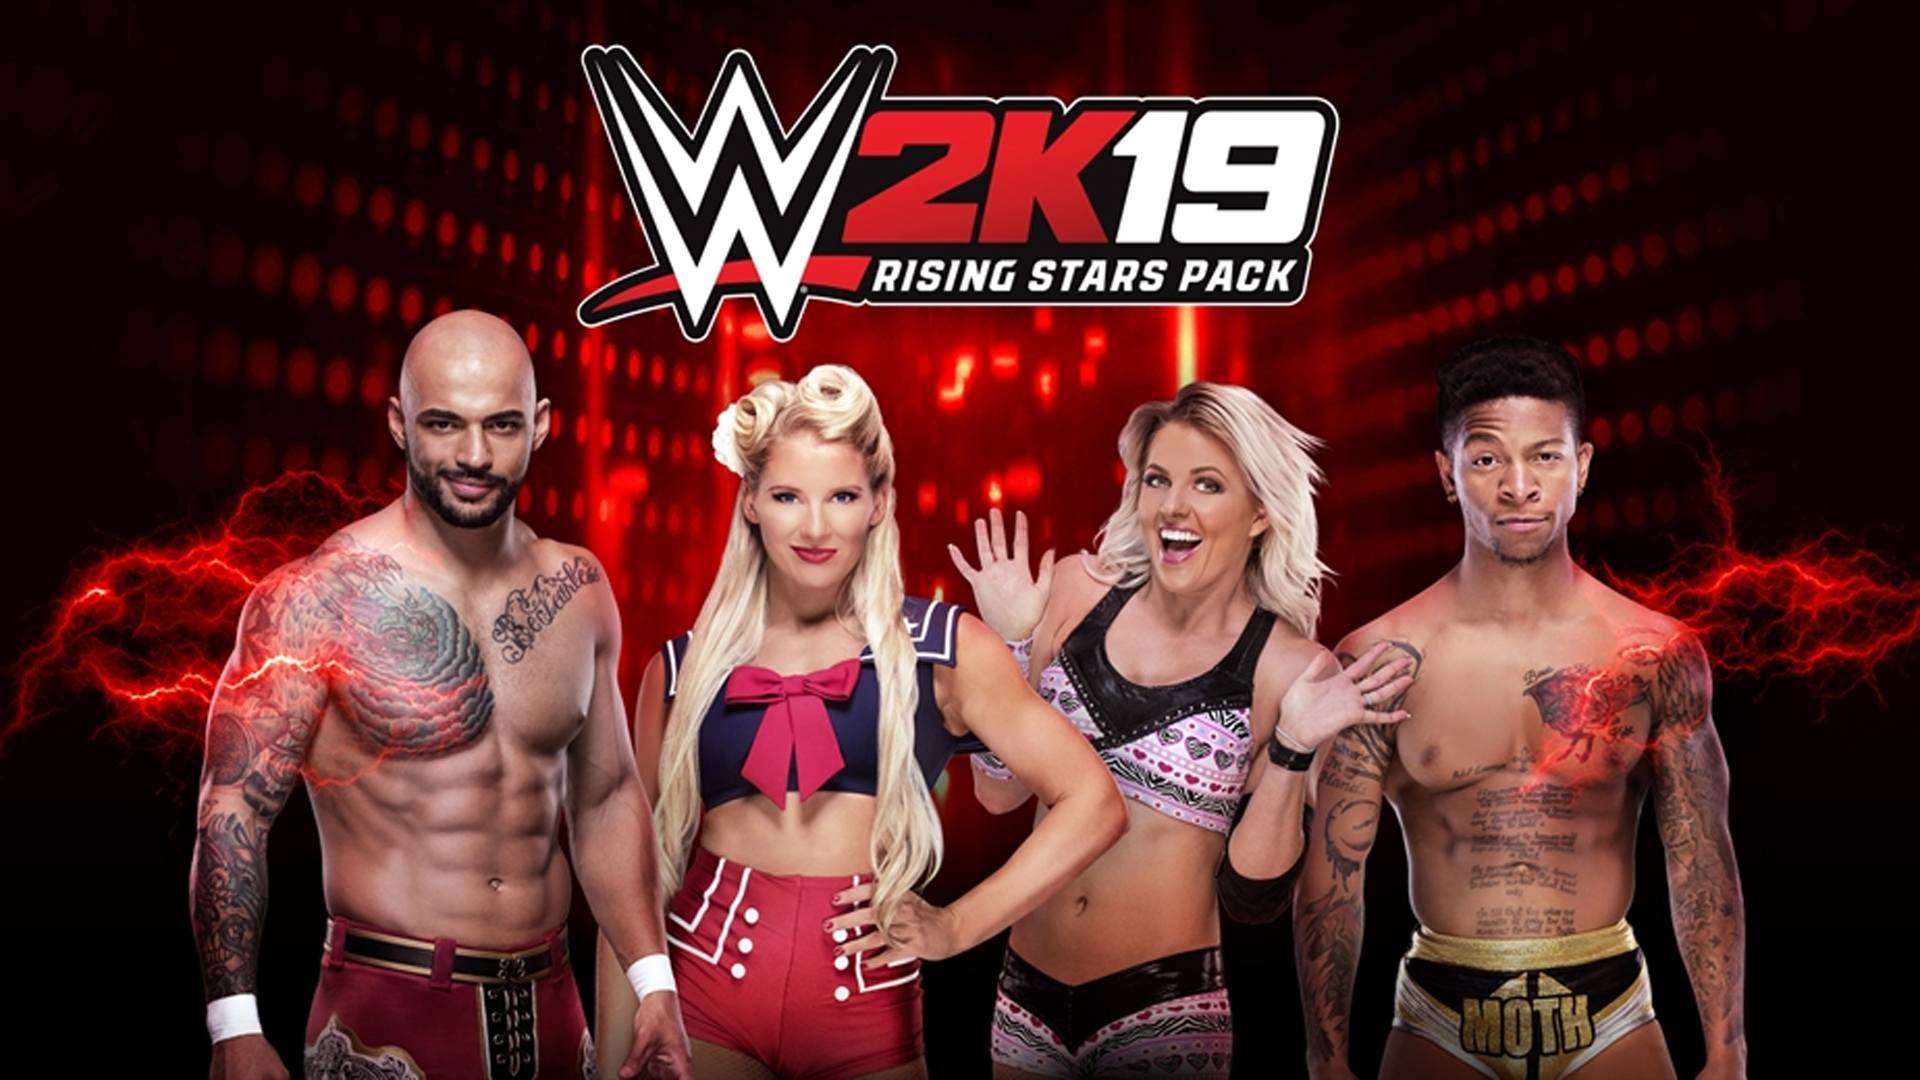 when did w2k19 come out